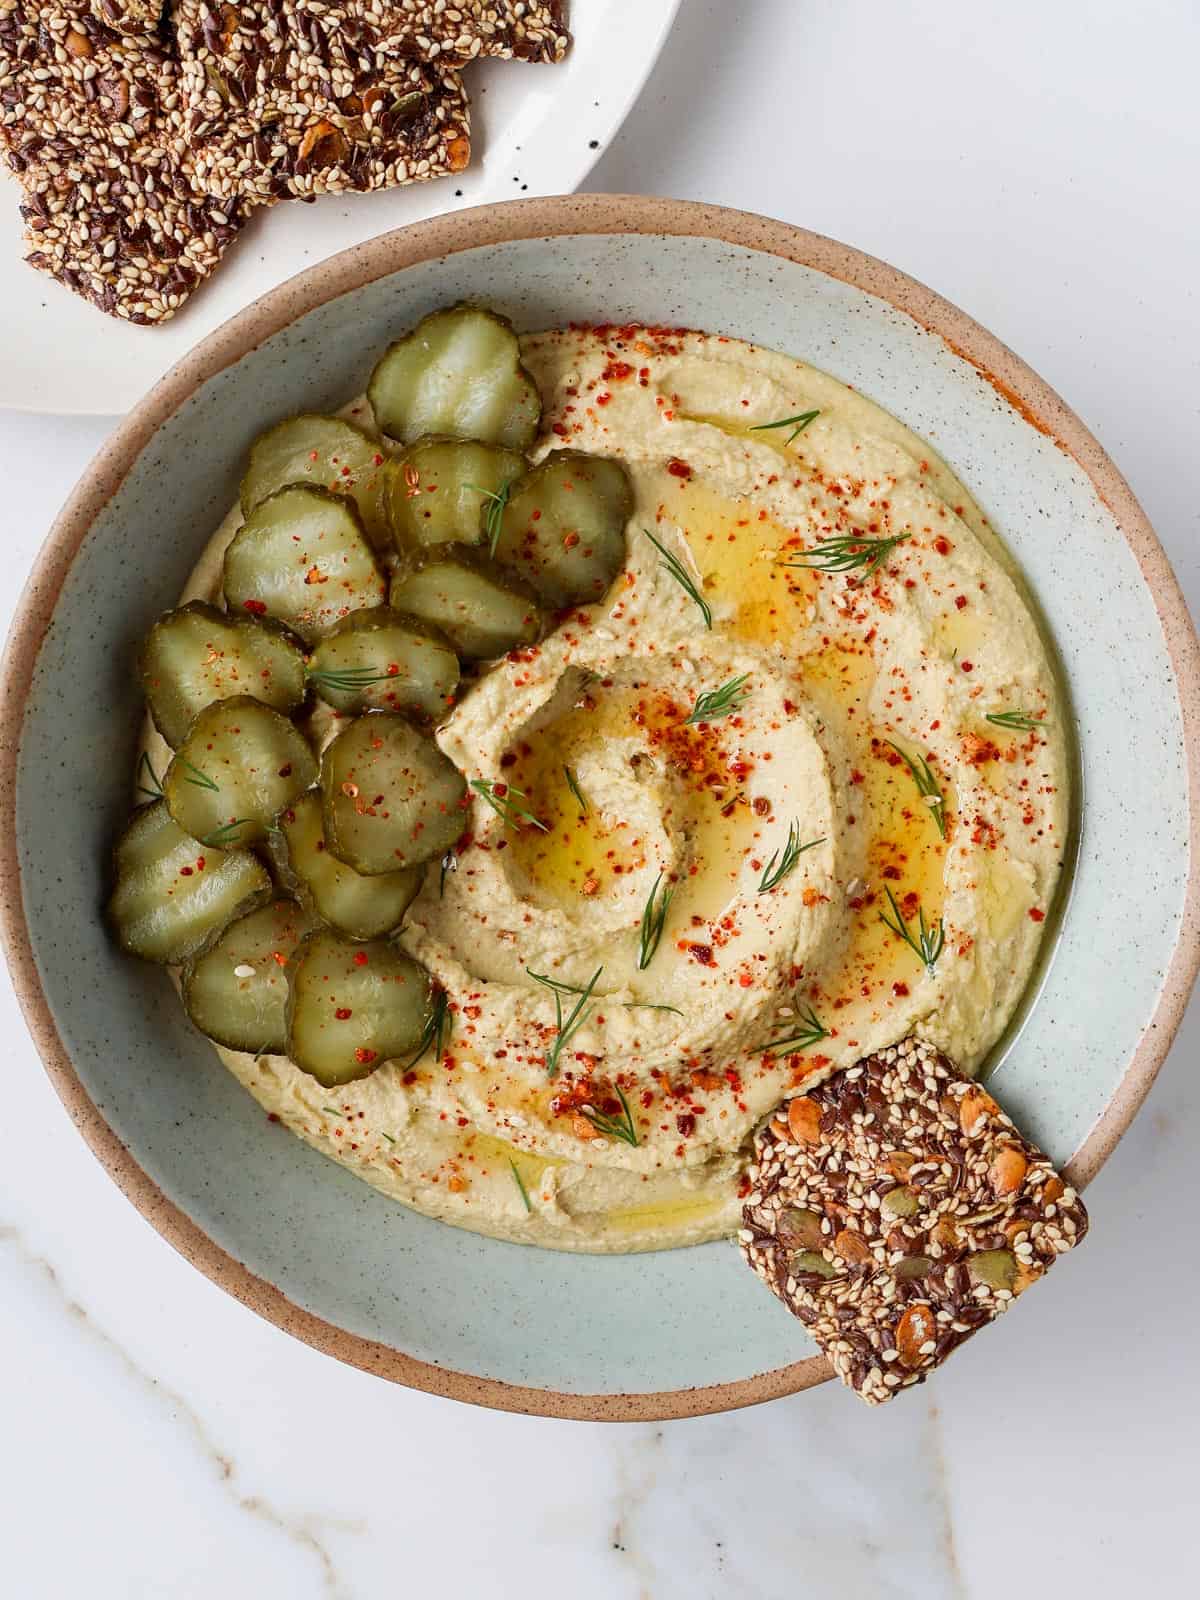 Hummus in a bowl topped with pickles, dill ad a seed cracker.